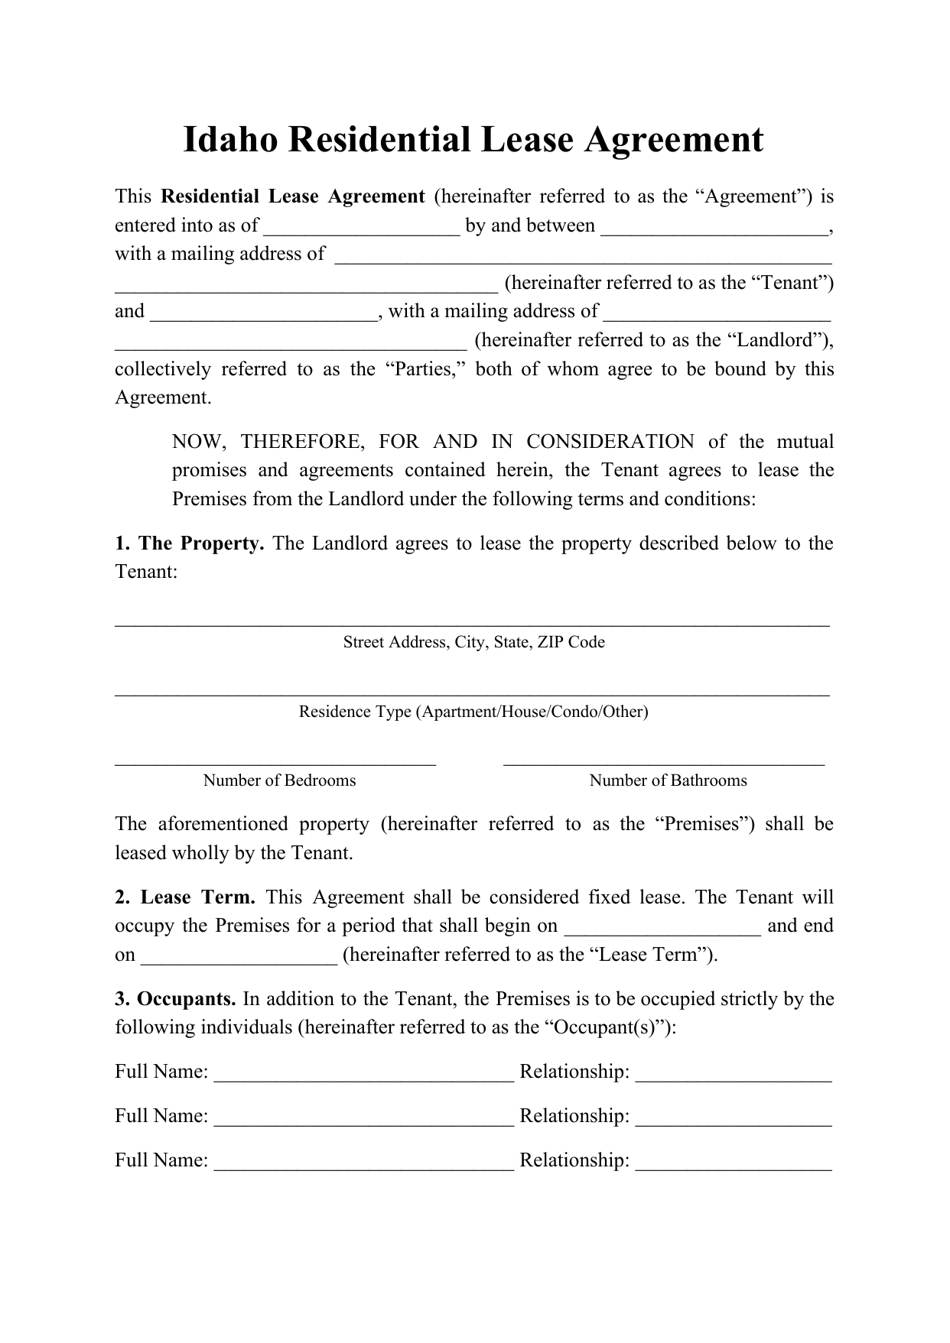 Idaho Residential Lease Agreement Template Download Printable PDF